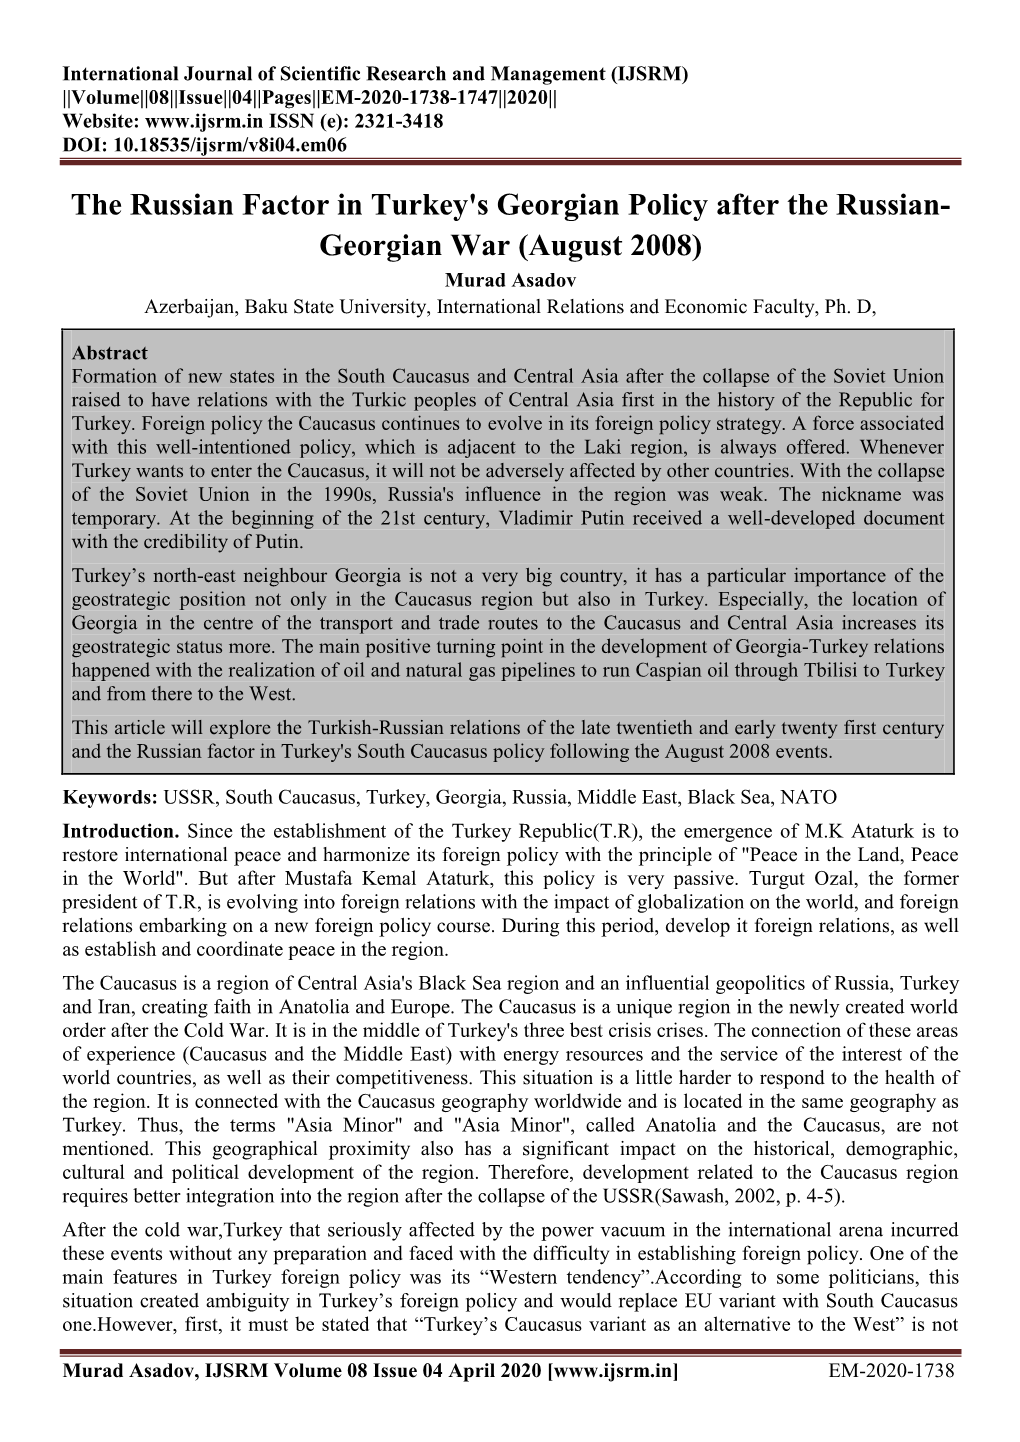 The Russian Factor in Turkey's Georgian Policy After the Russian- Georgian War (August 2008)